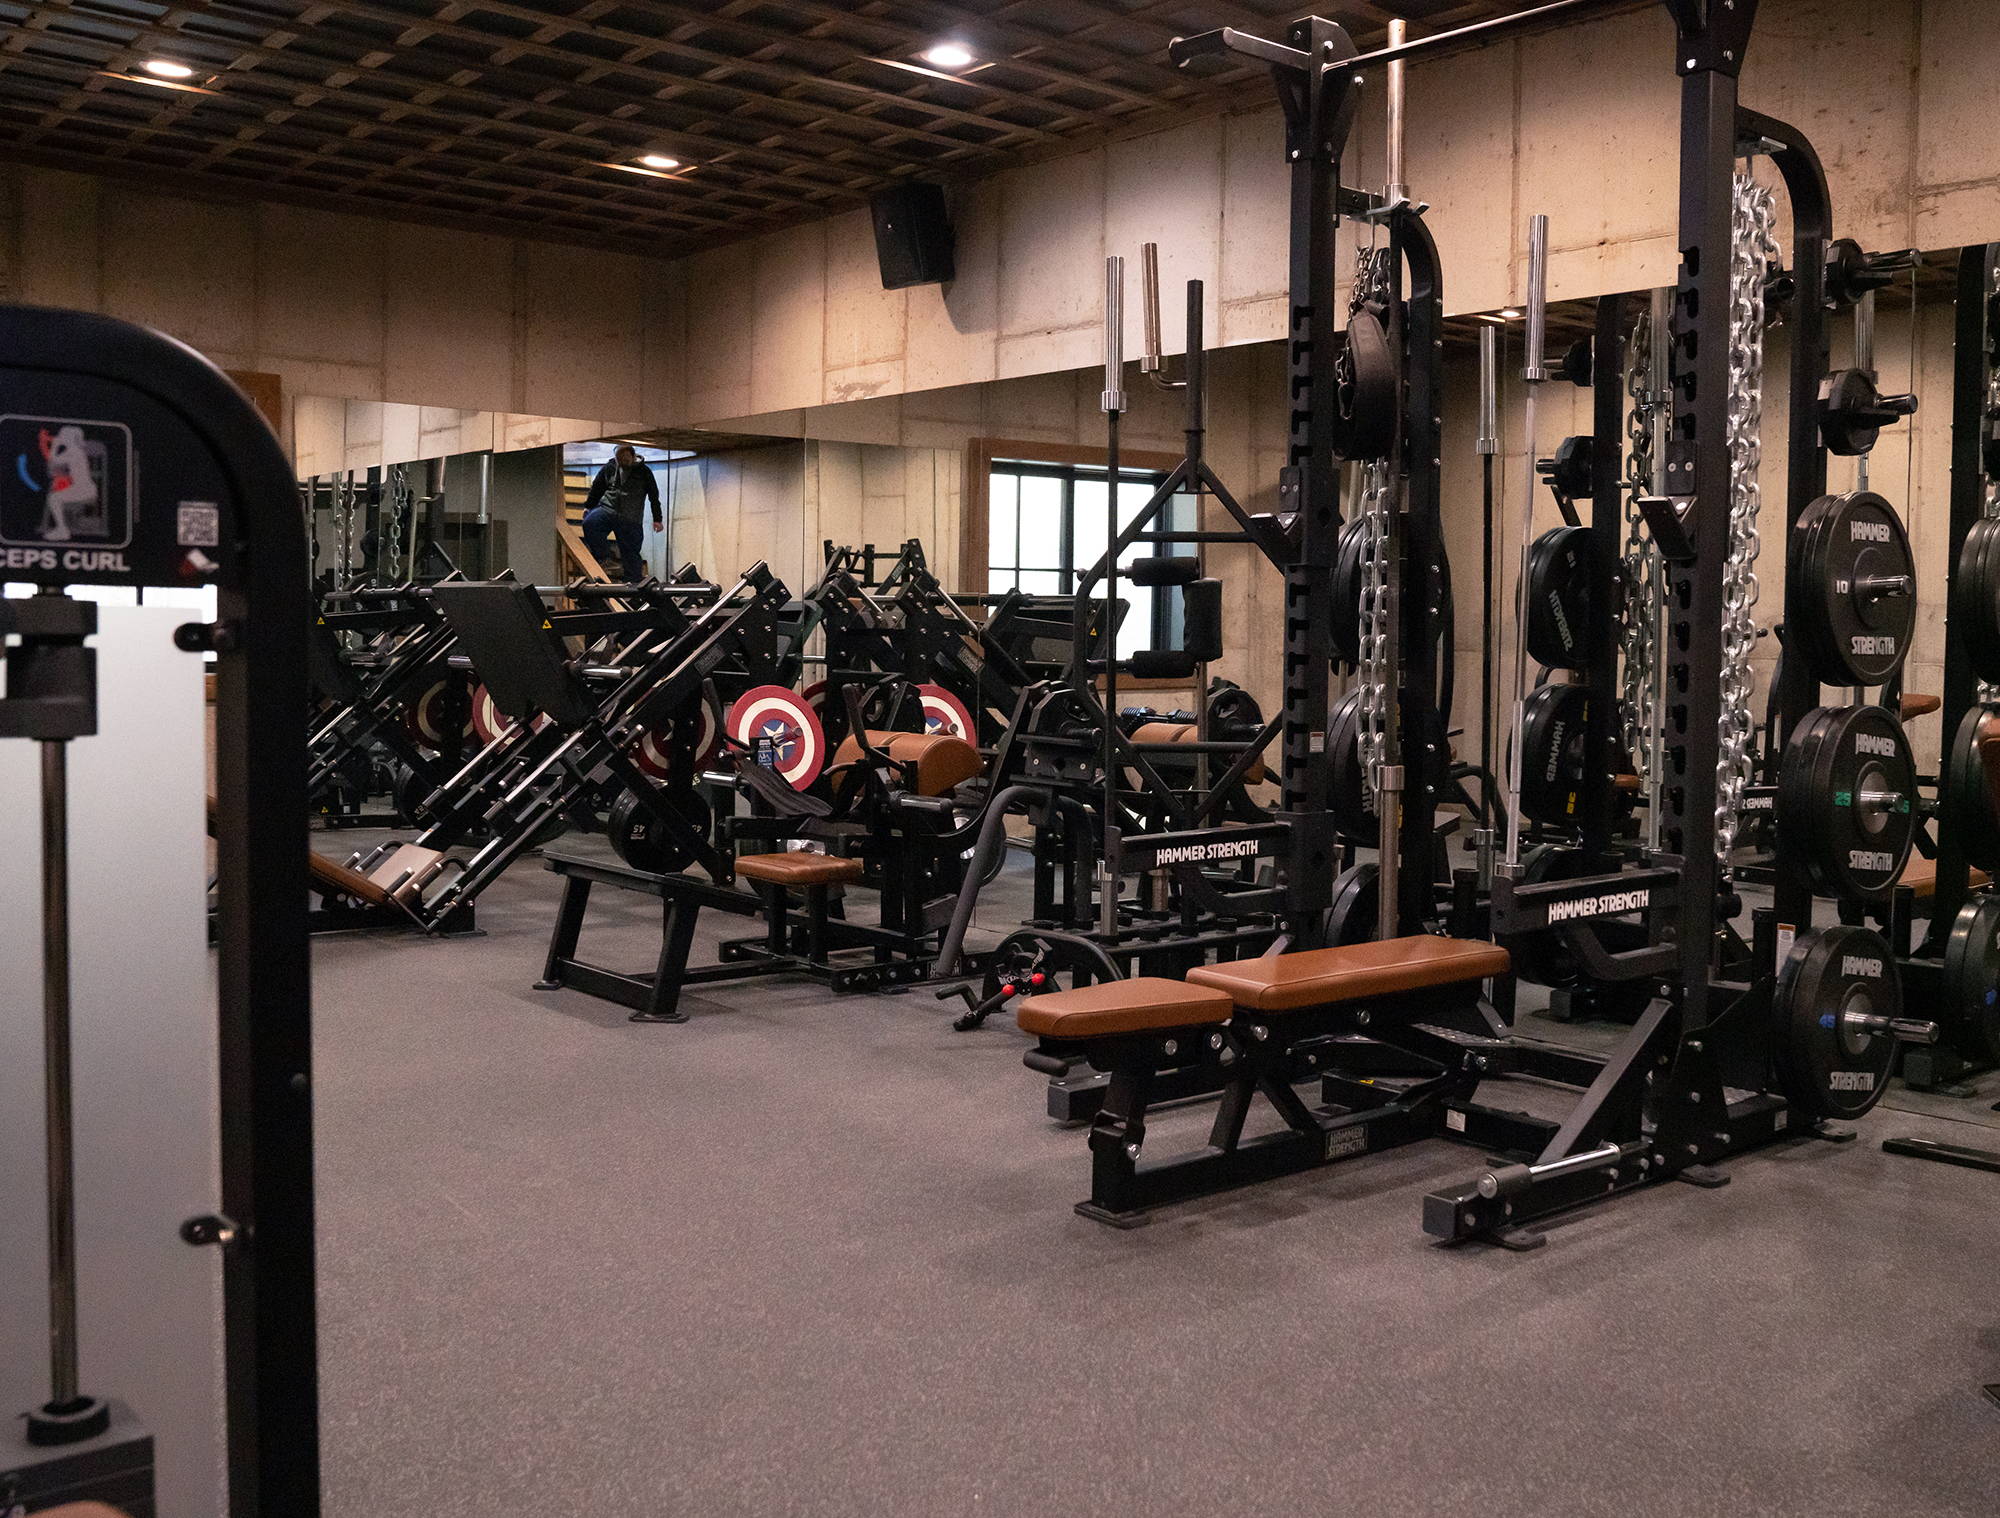 Custom home gym with Hammer Strength squat rack, benches, and plate-loaded exercise equipment